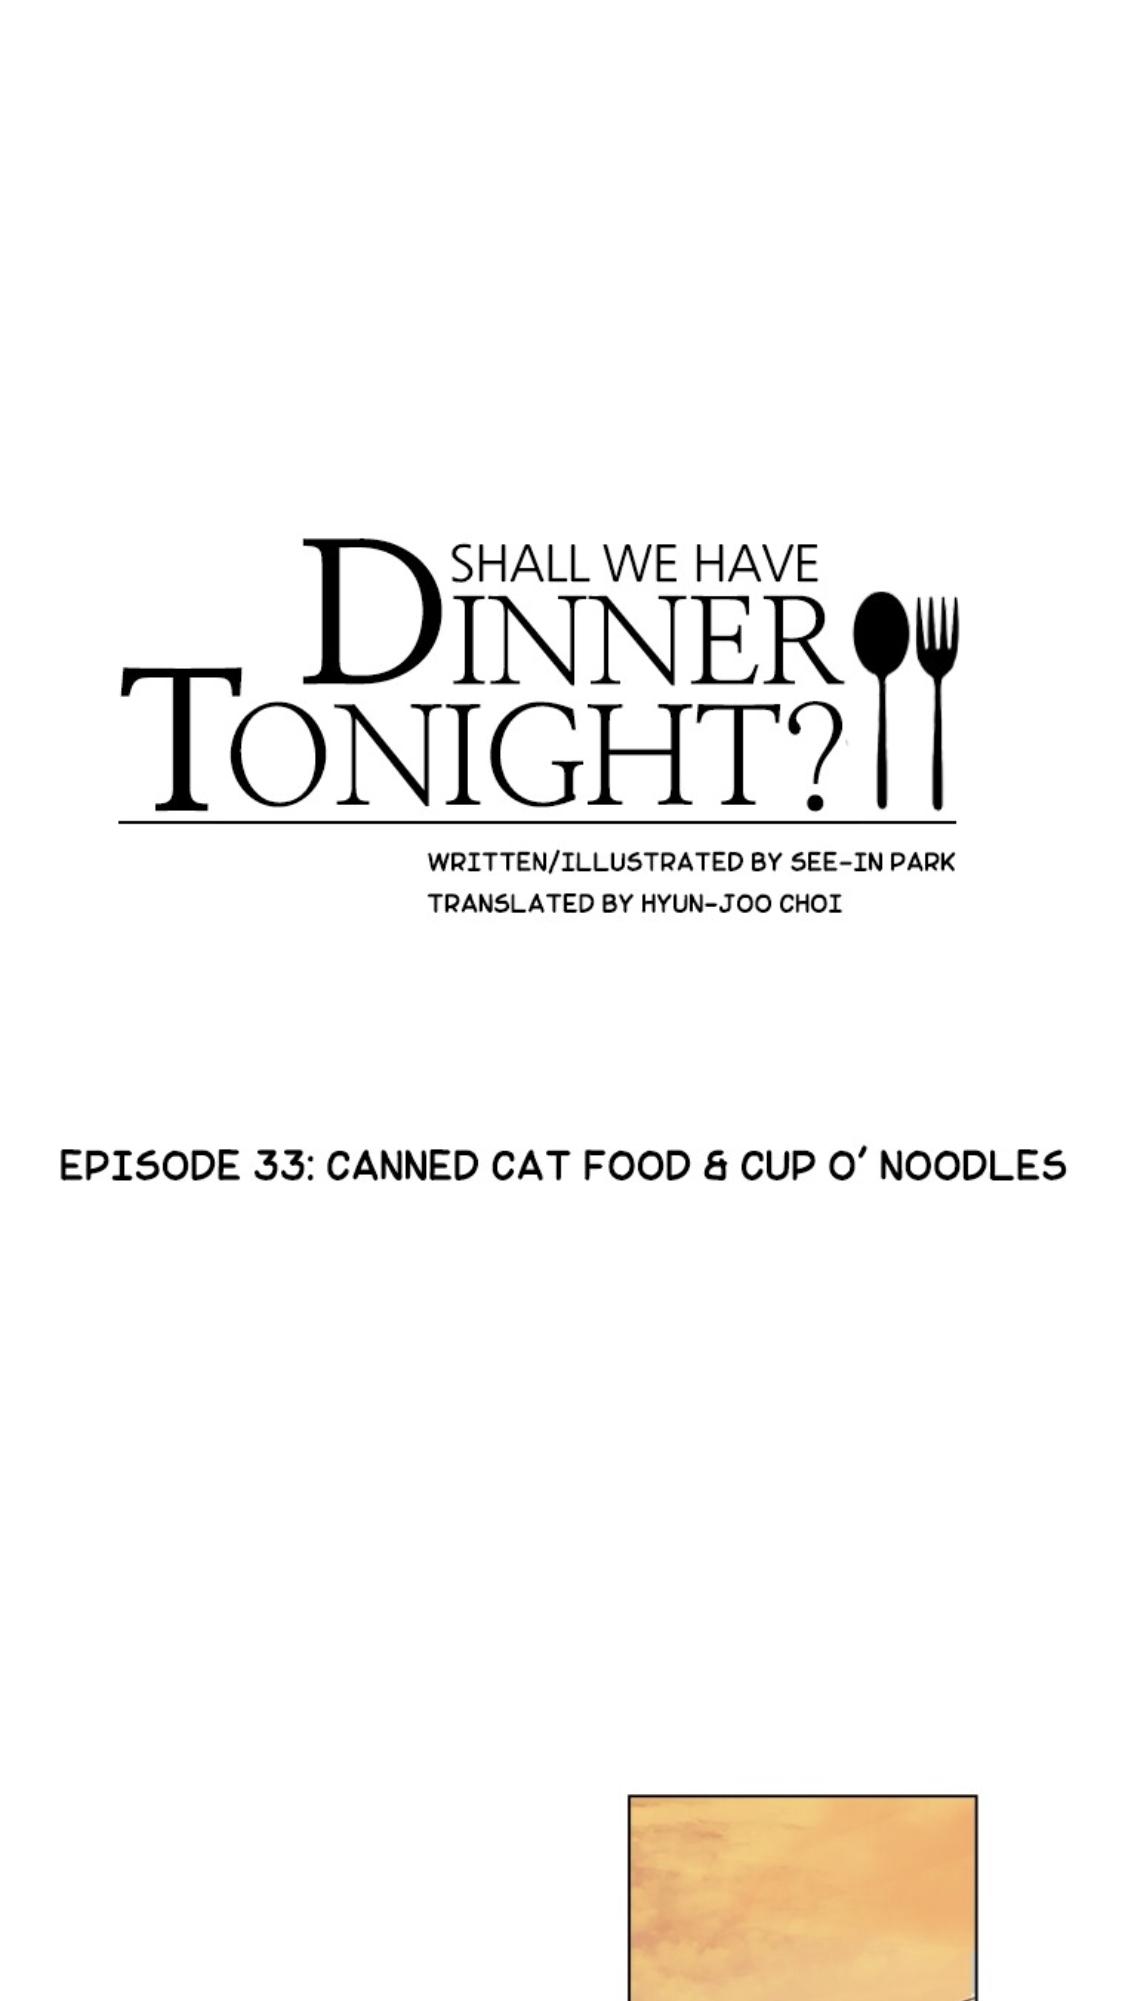 How about having Dinner together? - episode 34 - 0